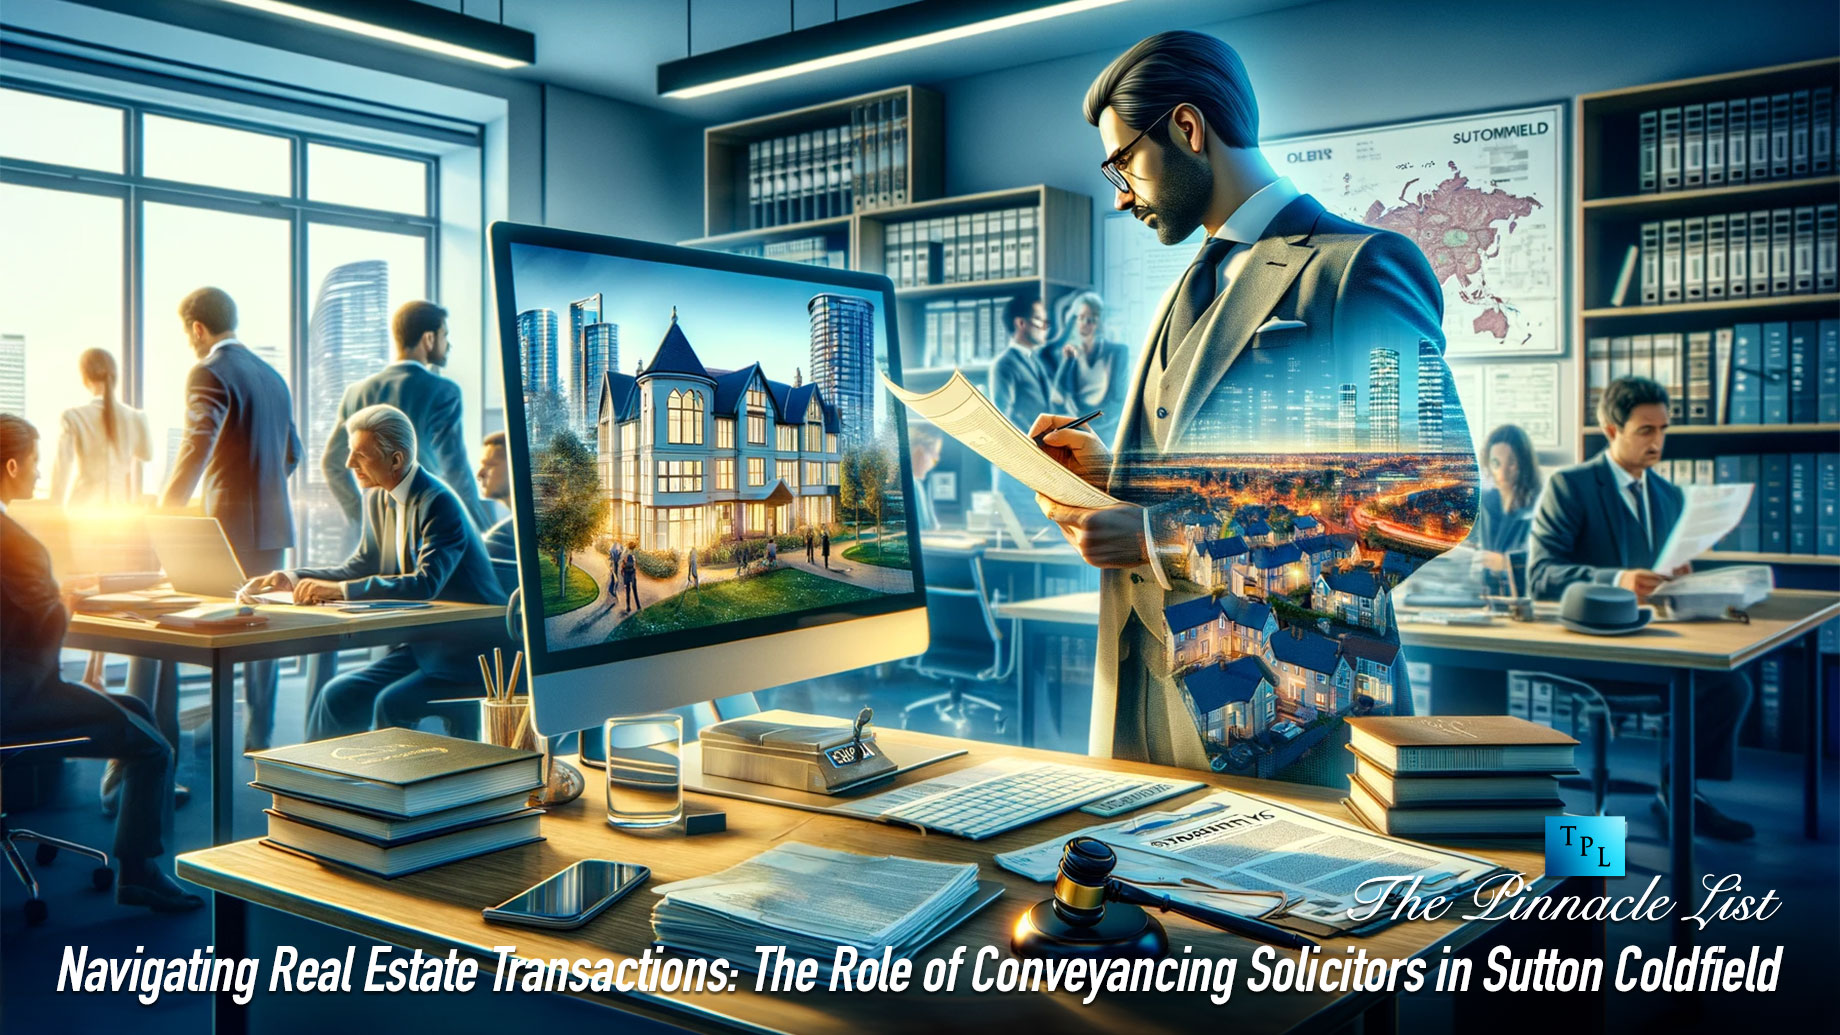 Navigating Real Estate Transactions: The Role of Conveyancing Solicitors in Sutton Coldfield